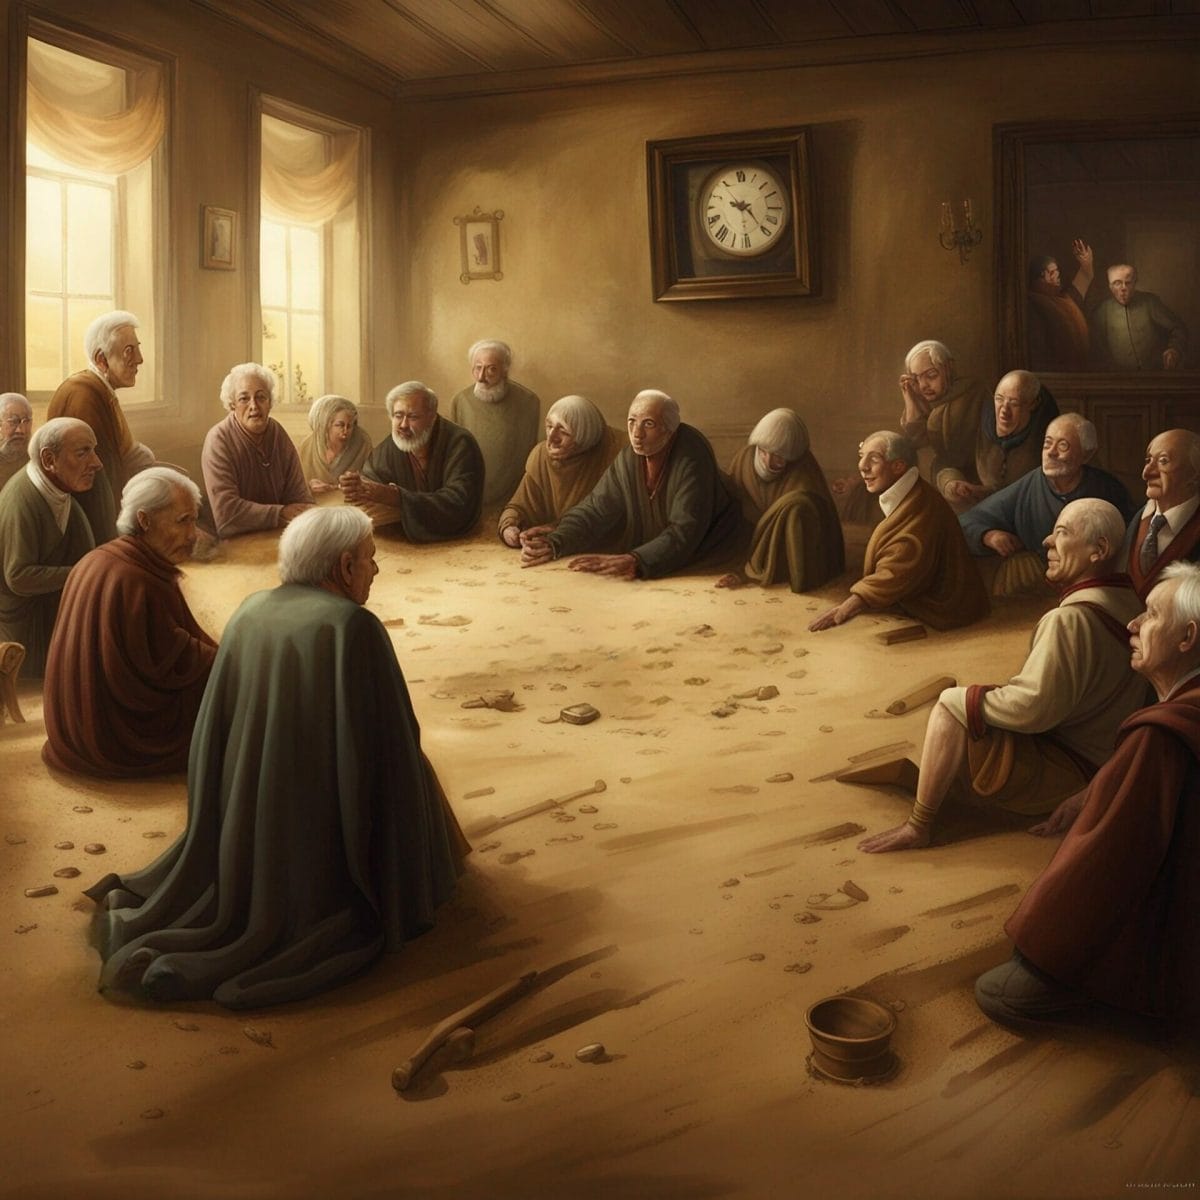 A room full of elderly people sitting in piles of sand.